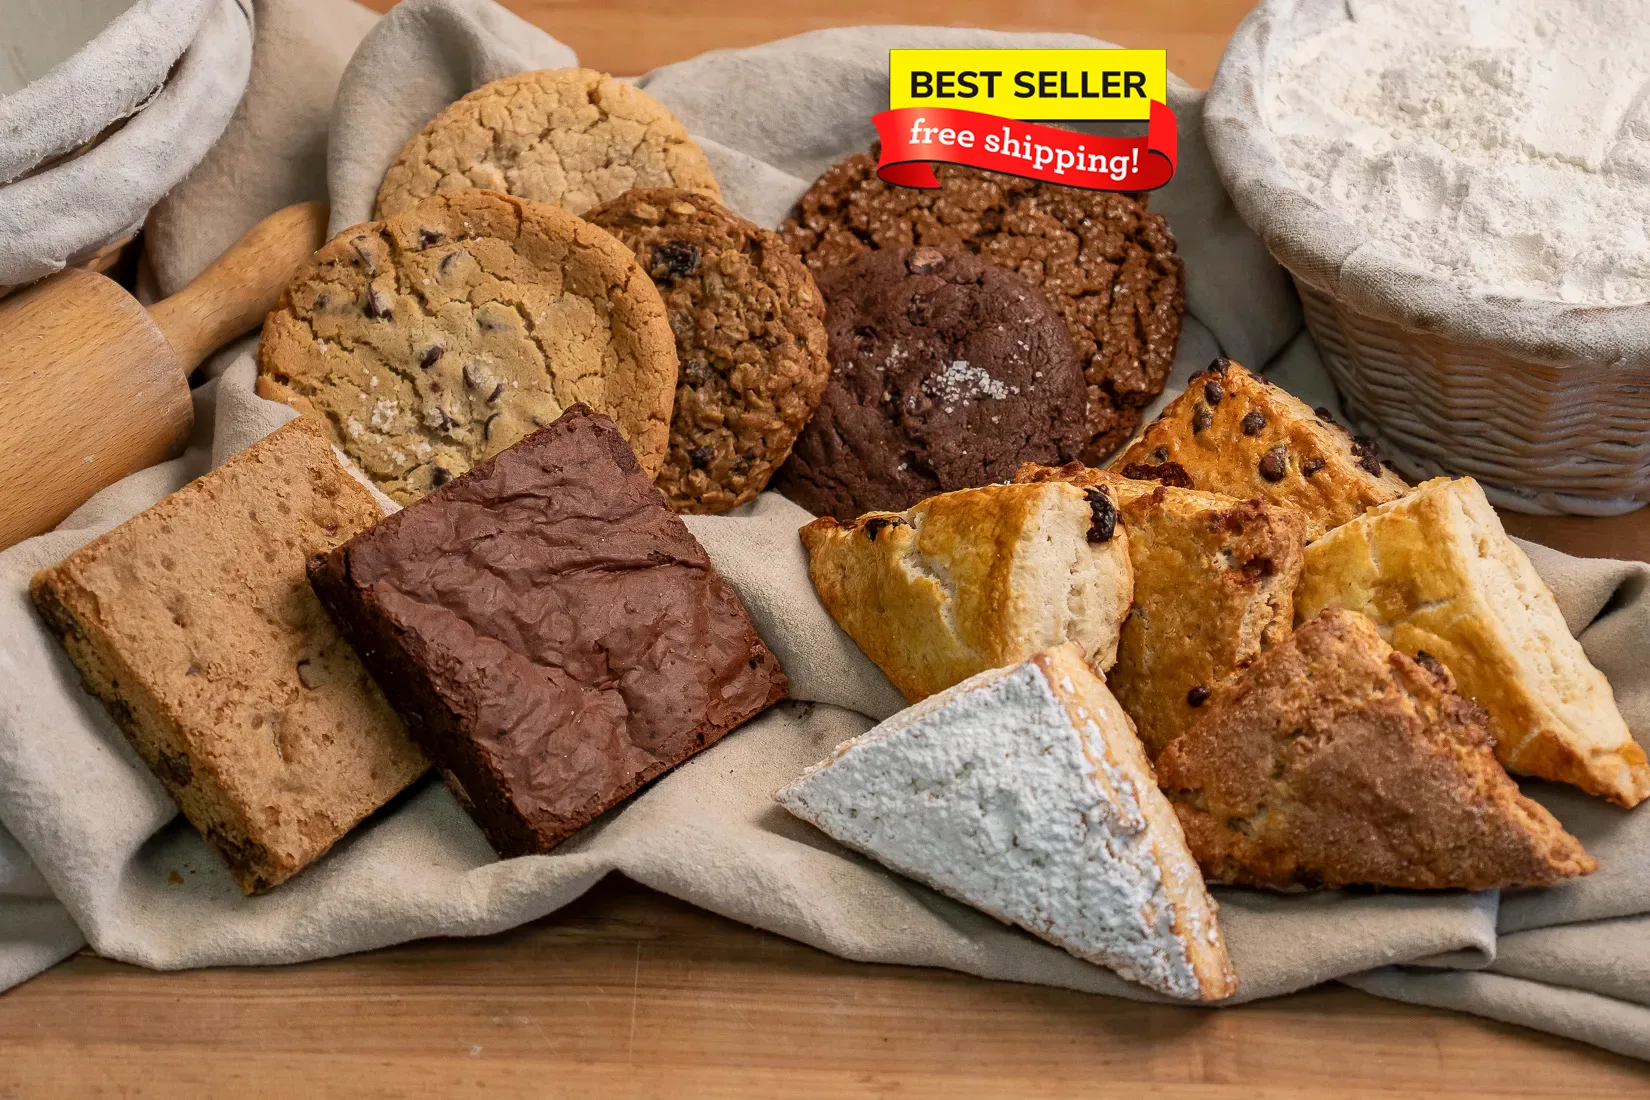 Customizable Pastry Box - Best Selling, Crust Pastries, Free